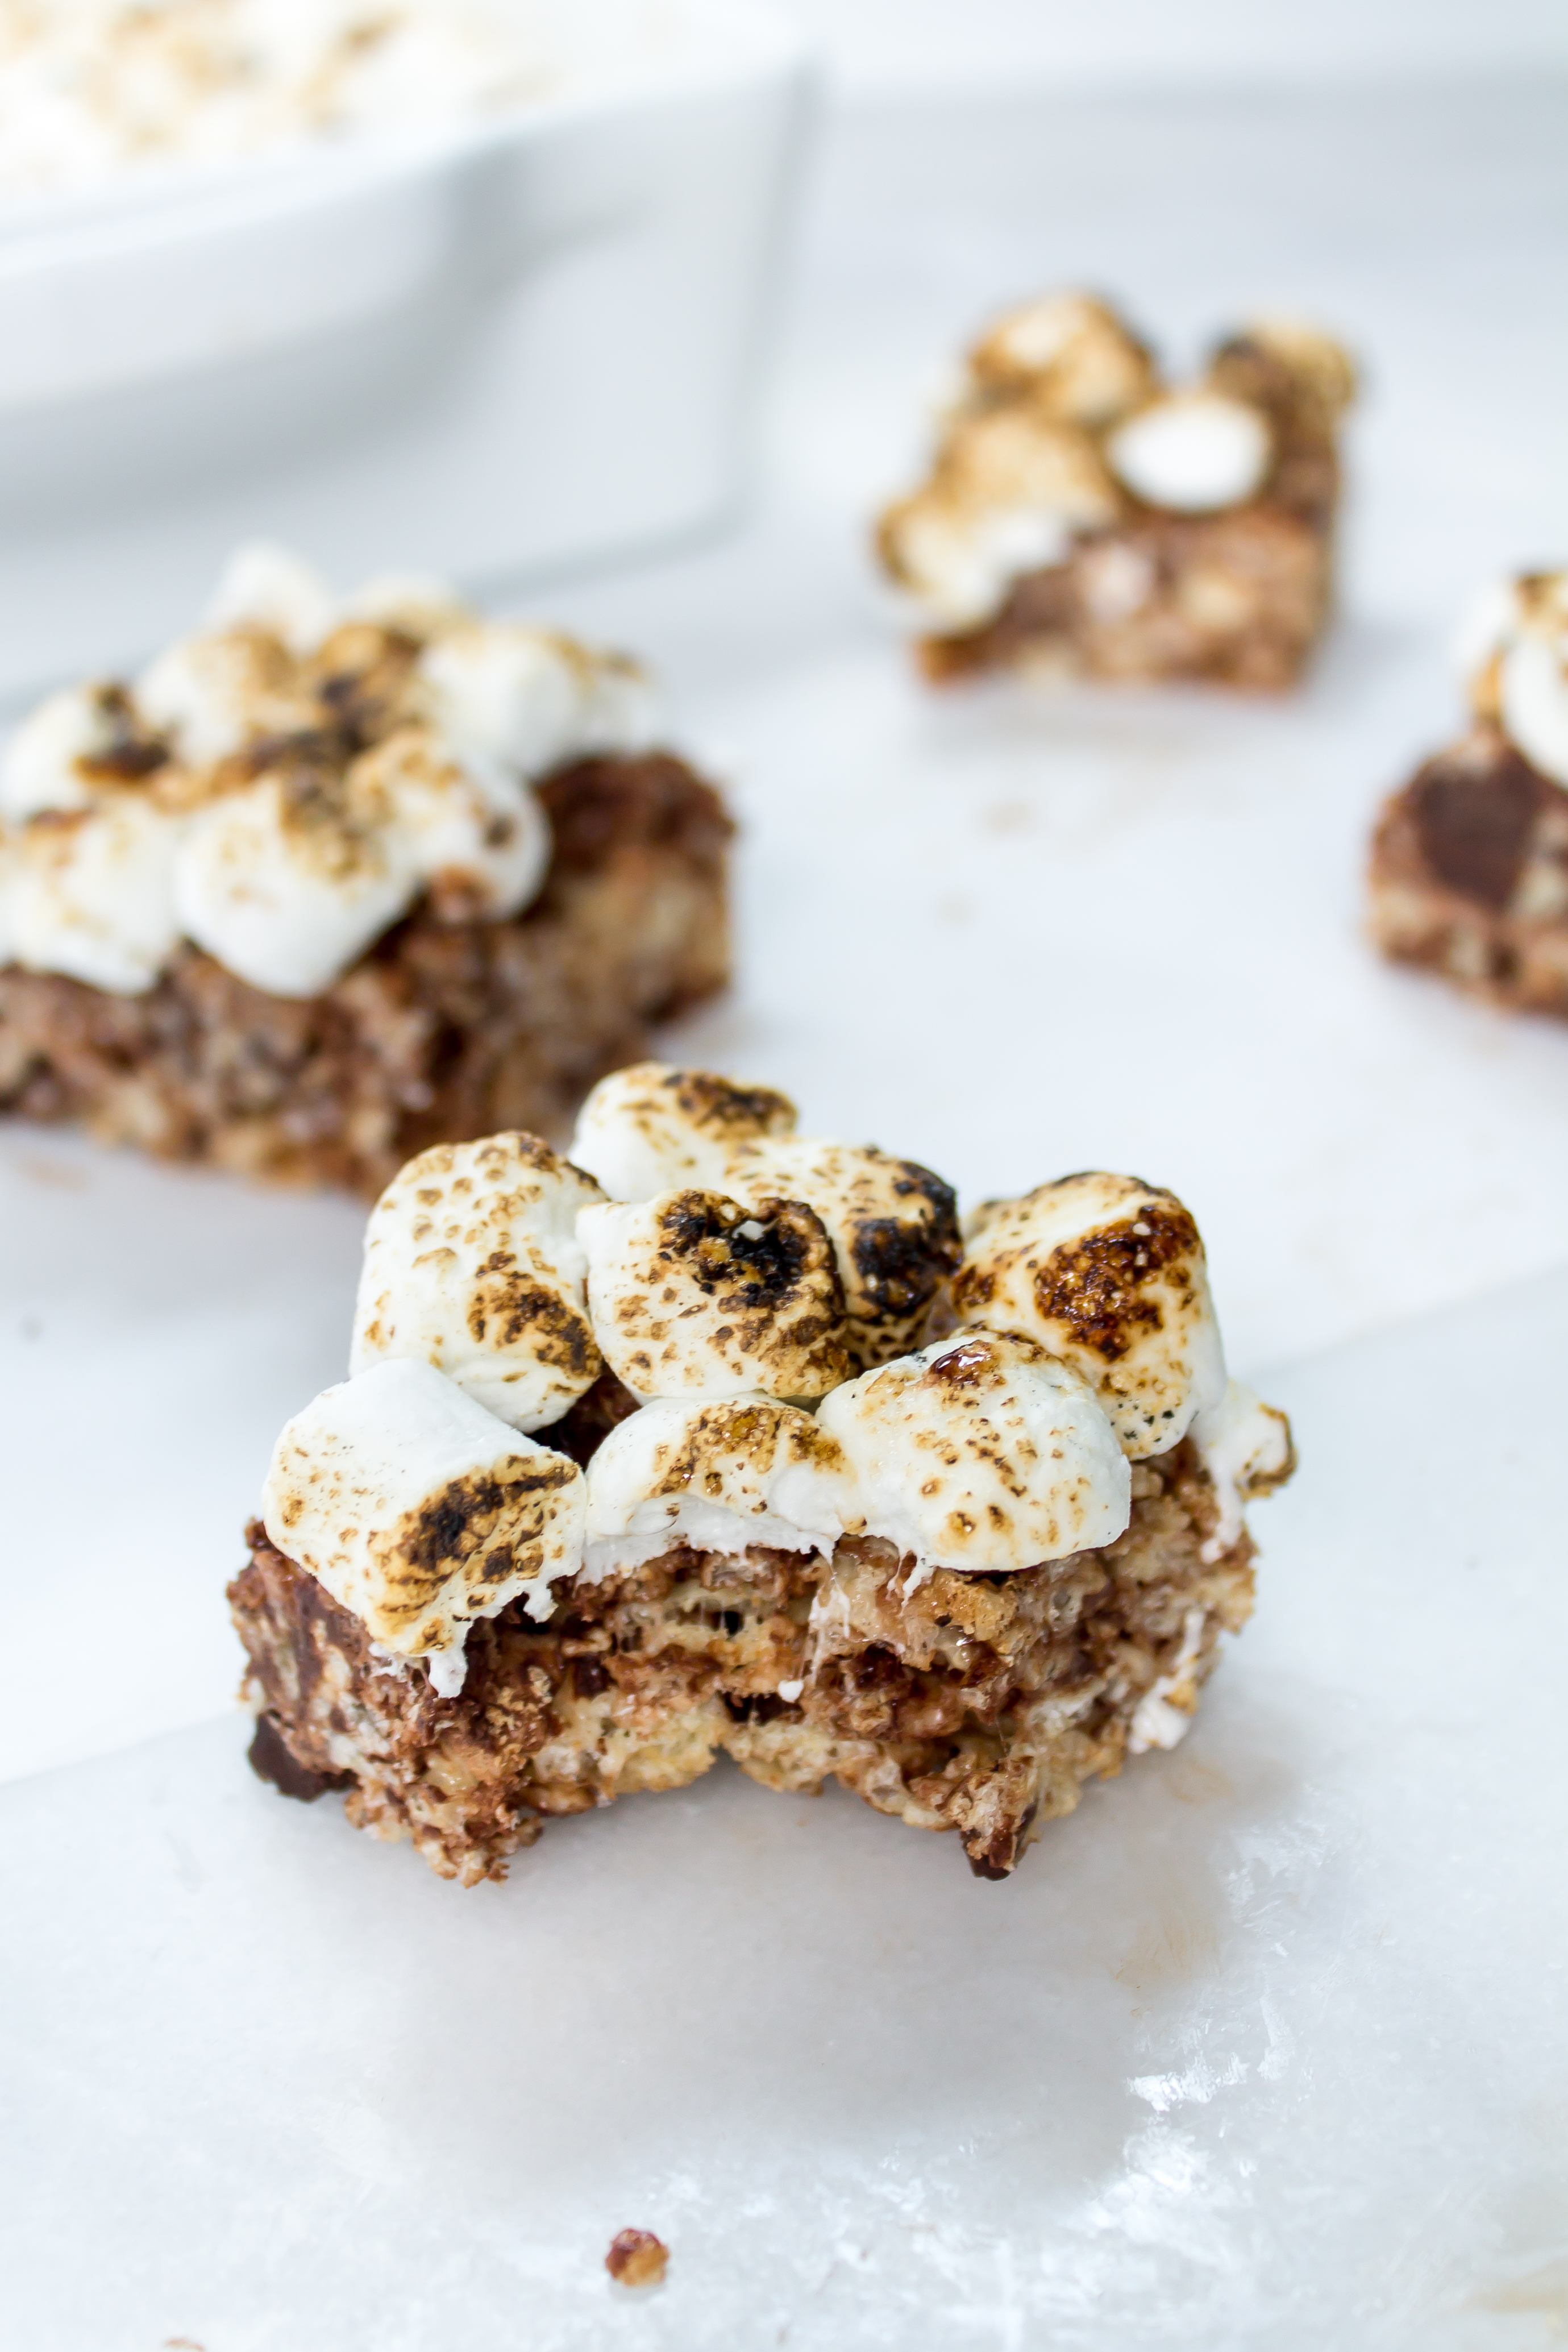 S'mores rice krispie treats are the easiest no-bake treat to make when you want that campfire s'mores taste without the hassle. | Pass the Cookies | www.passthecookies.com